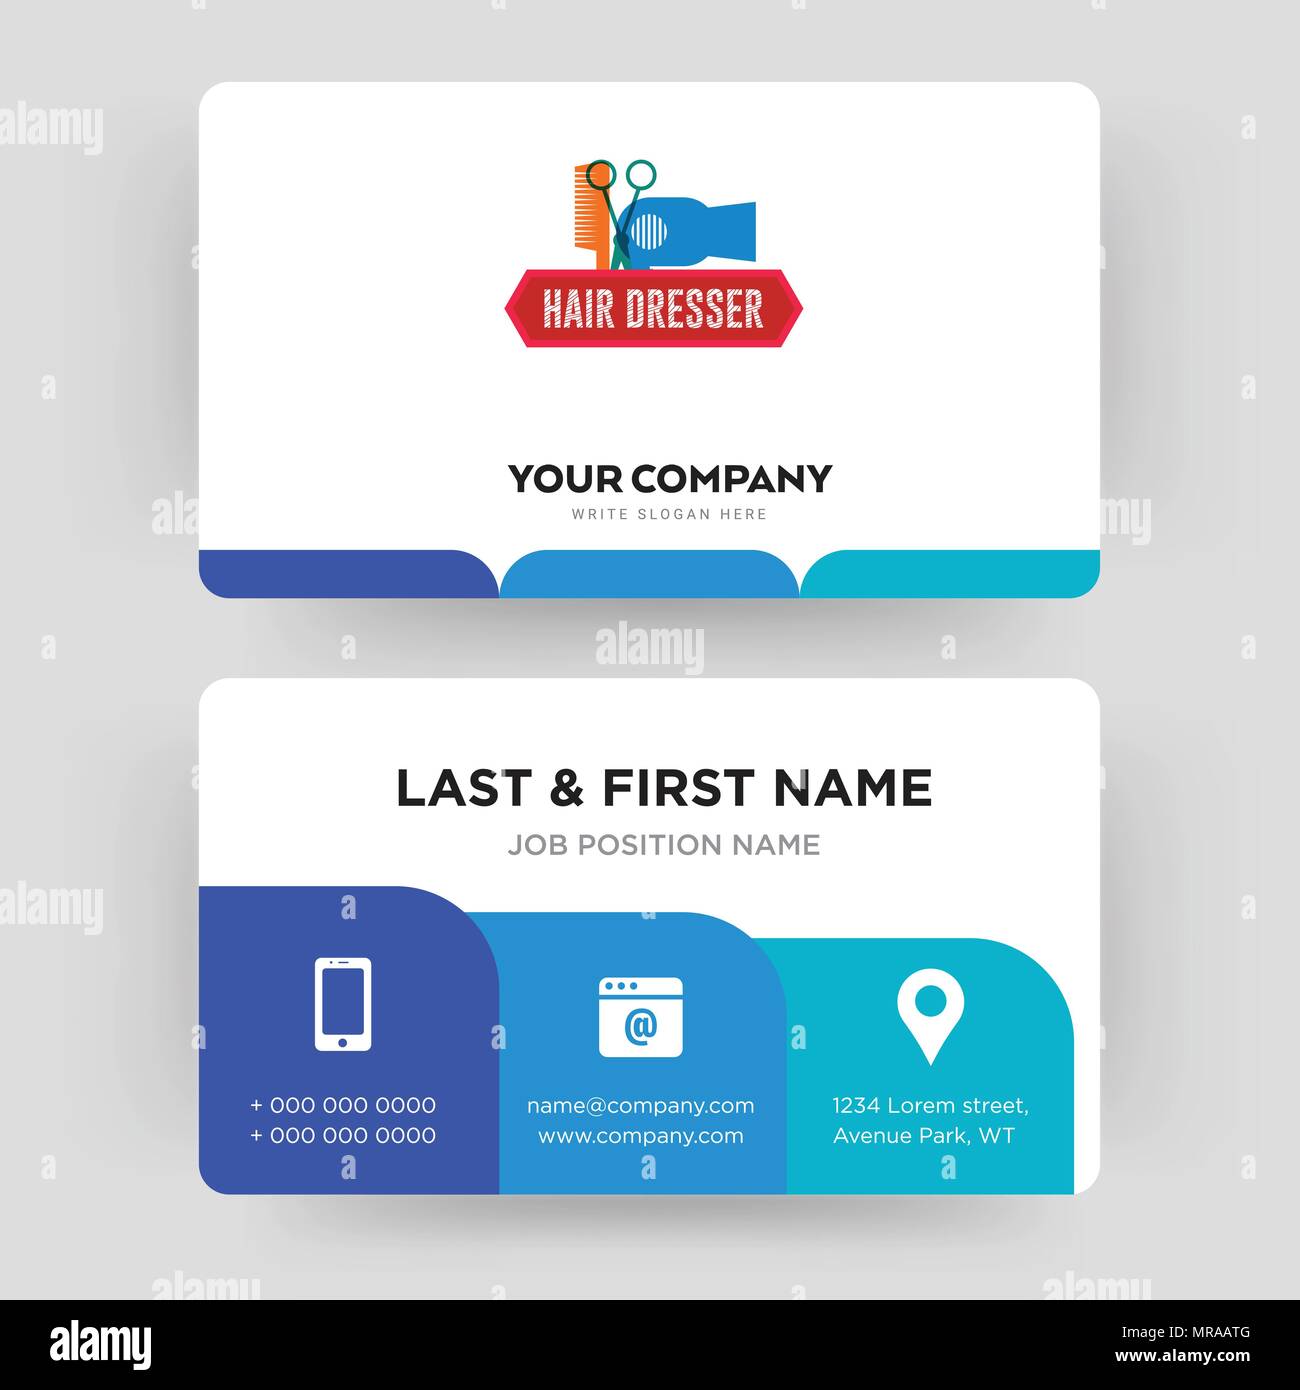 Hair Dresser Business Card Design Template Visiting For Your